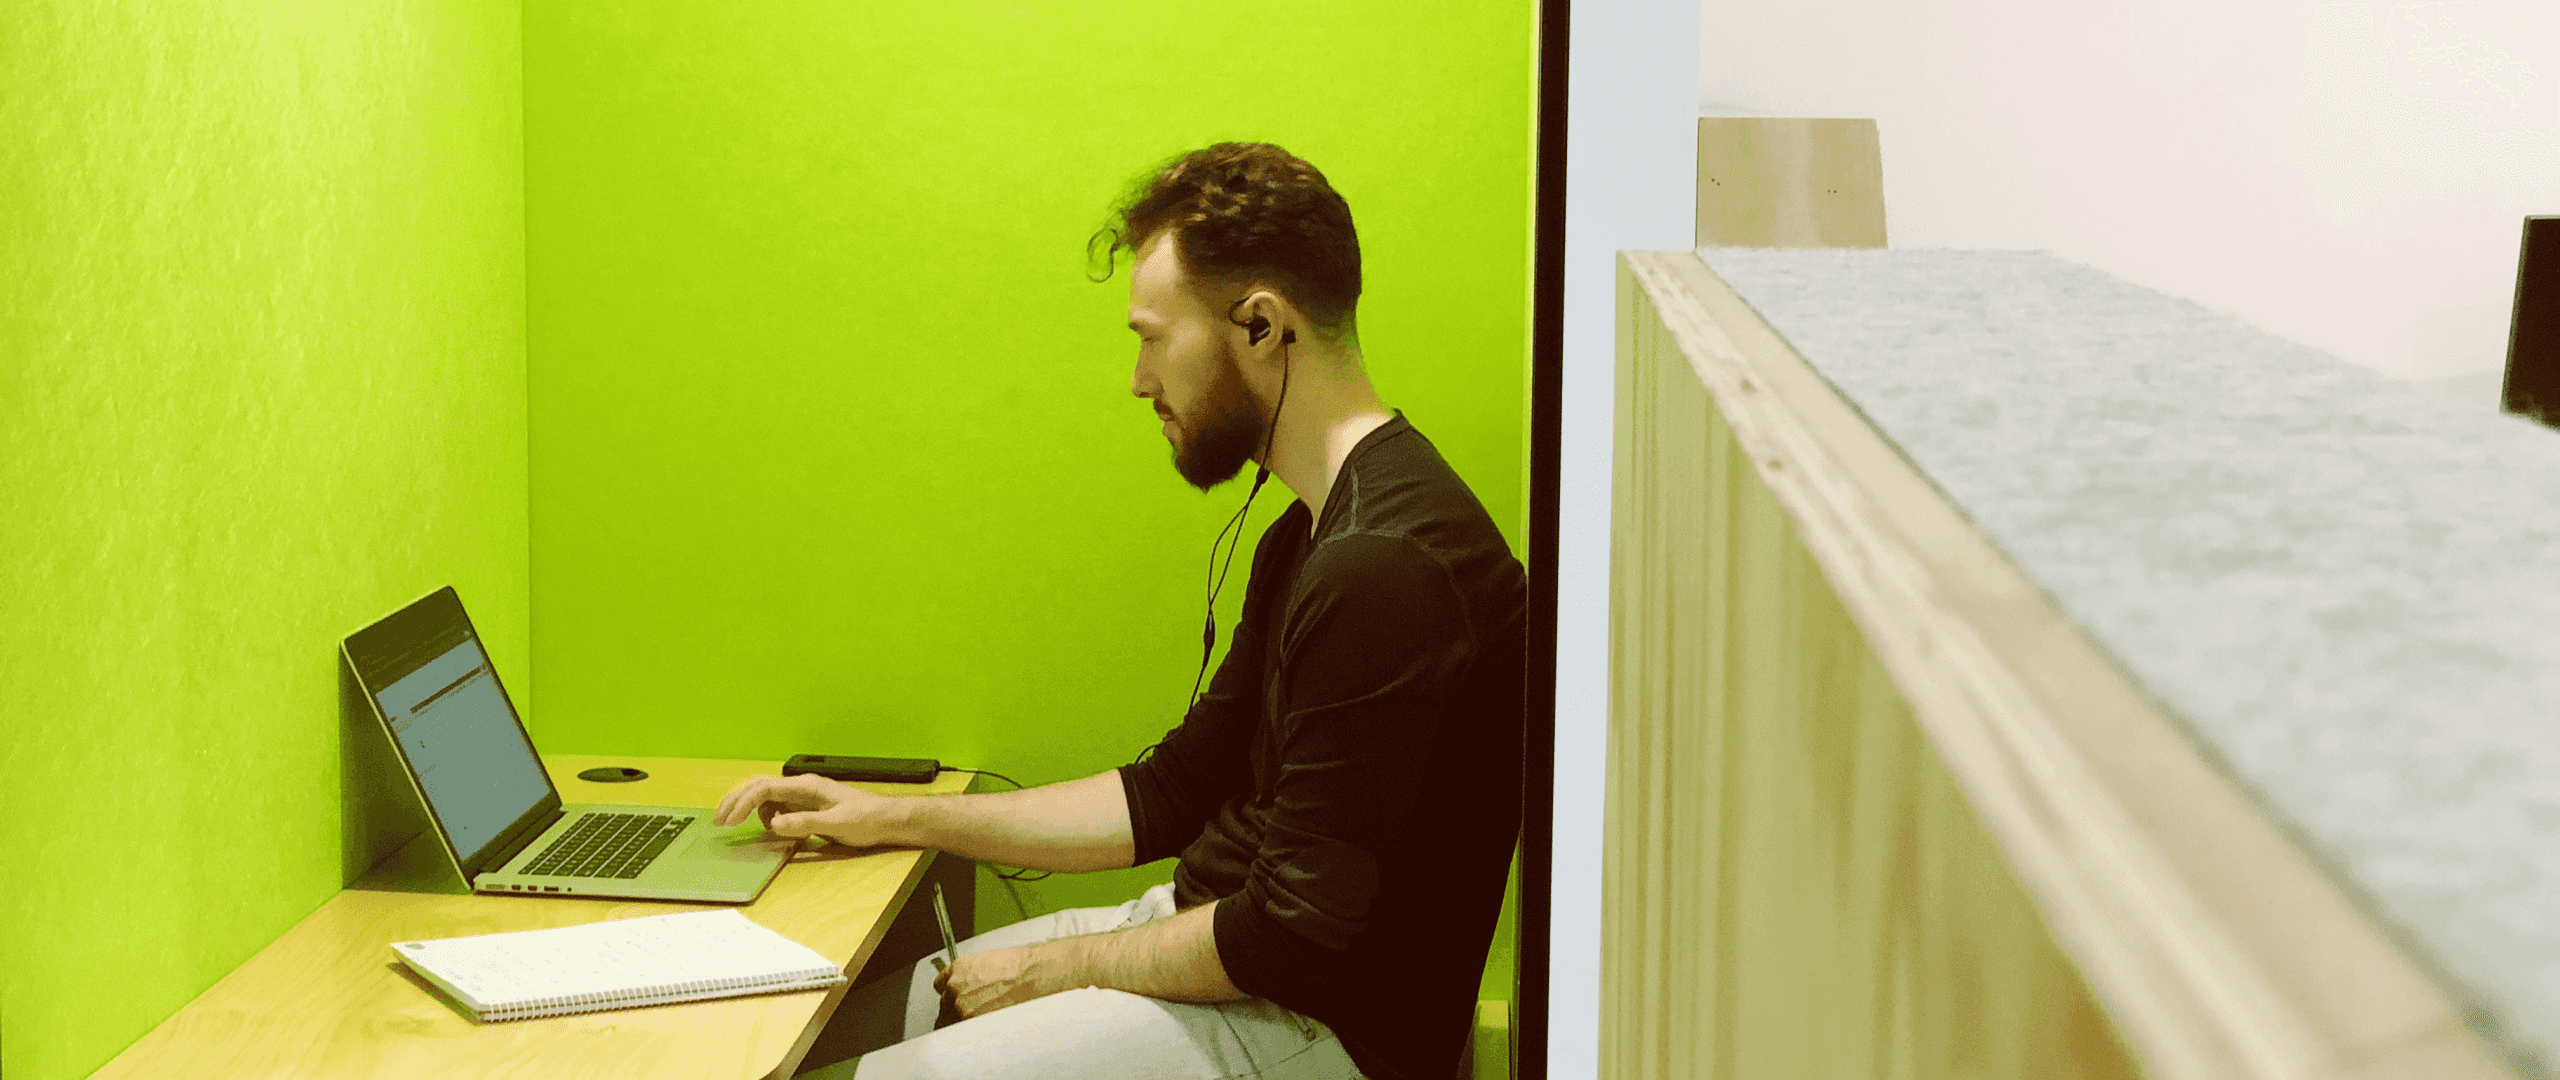 A software engineer wearing headphones working on a laptop